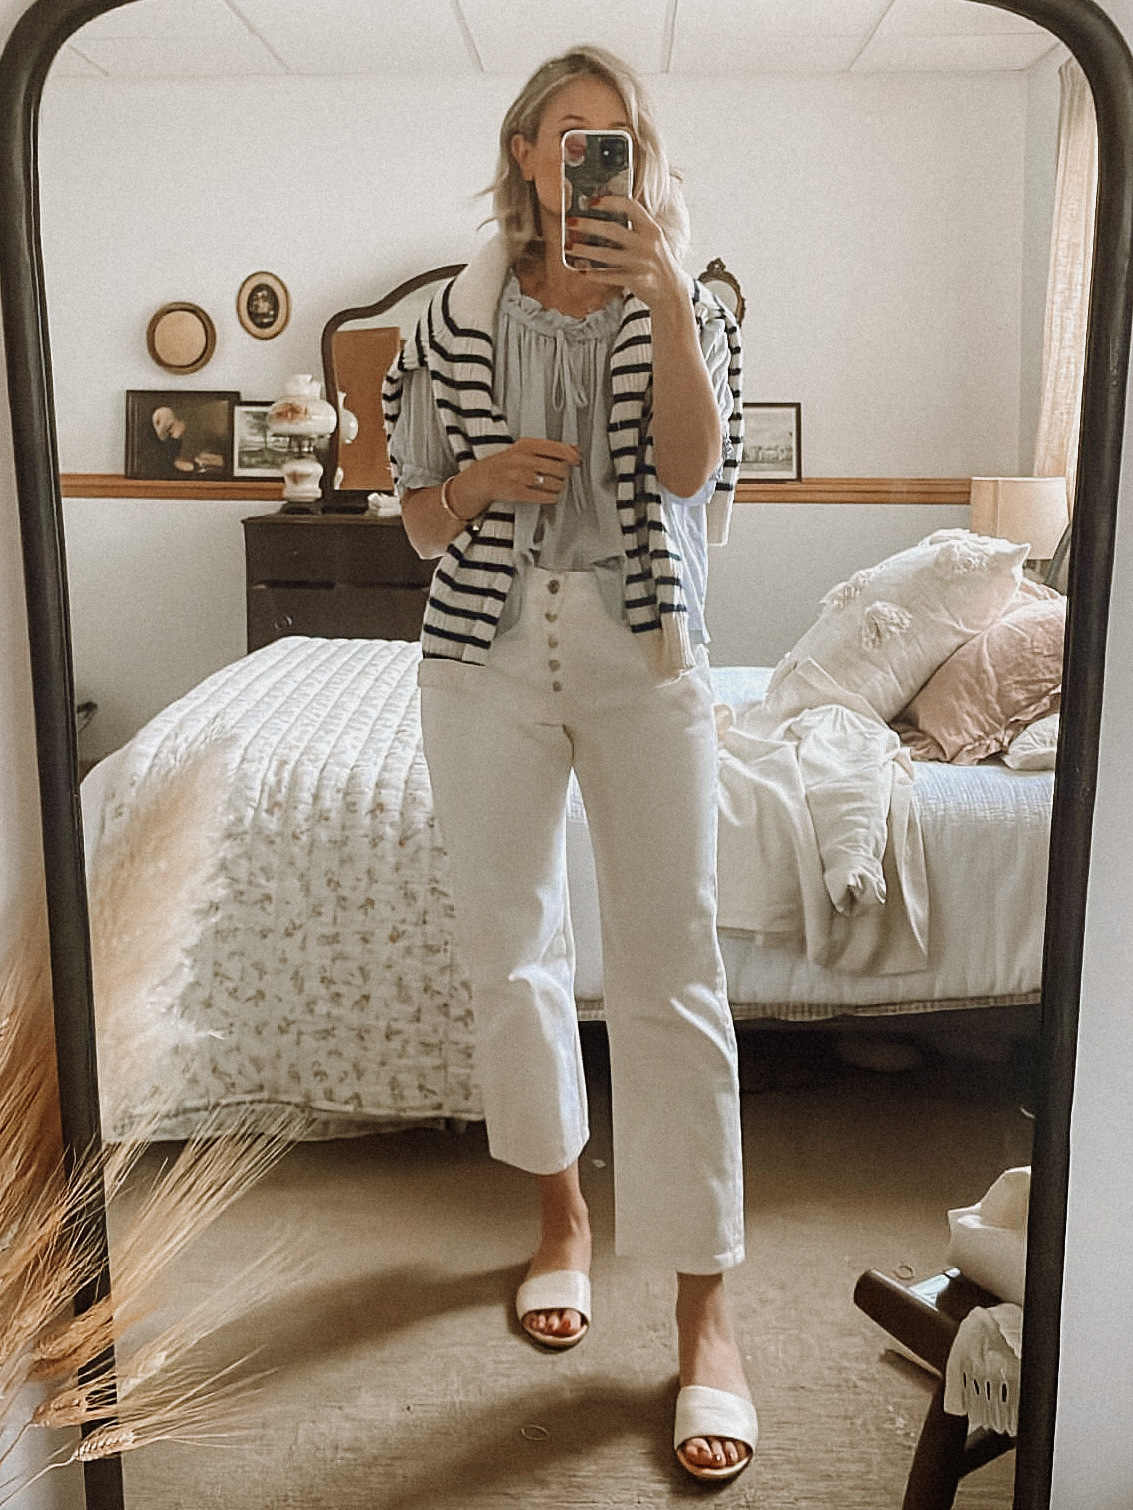 Karin Emily wears a low waisted white jeans, a blue doen blouse, and a striped cashmere sweater